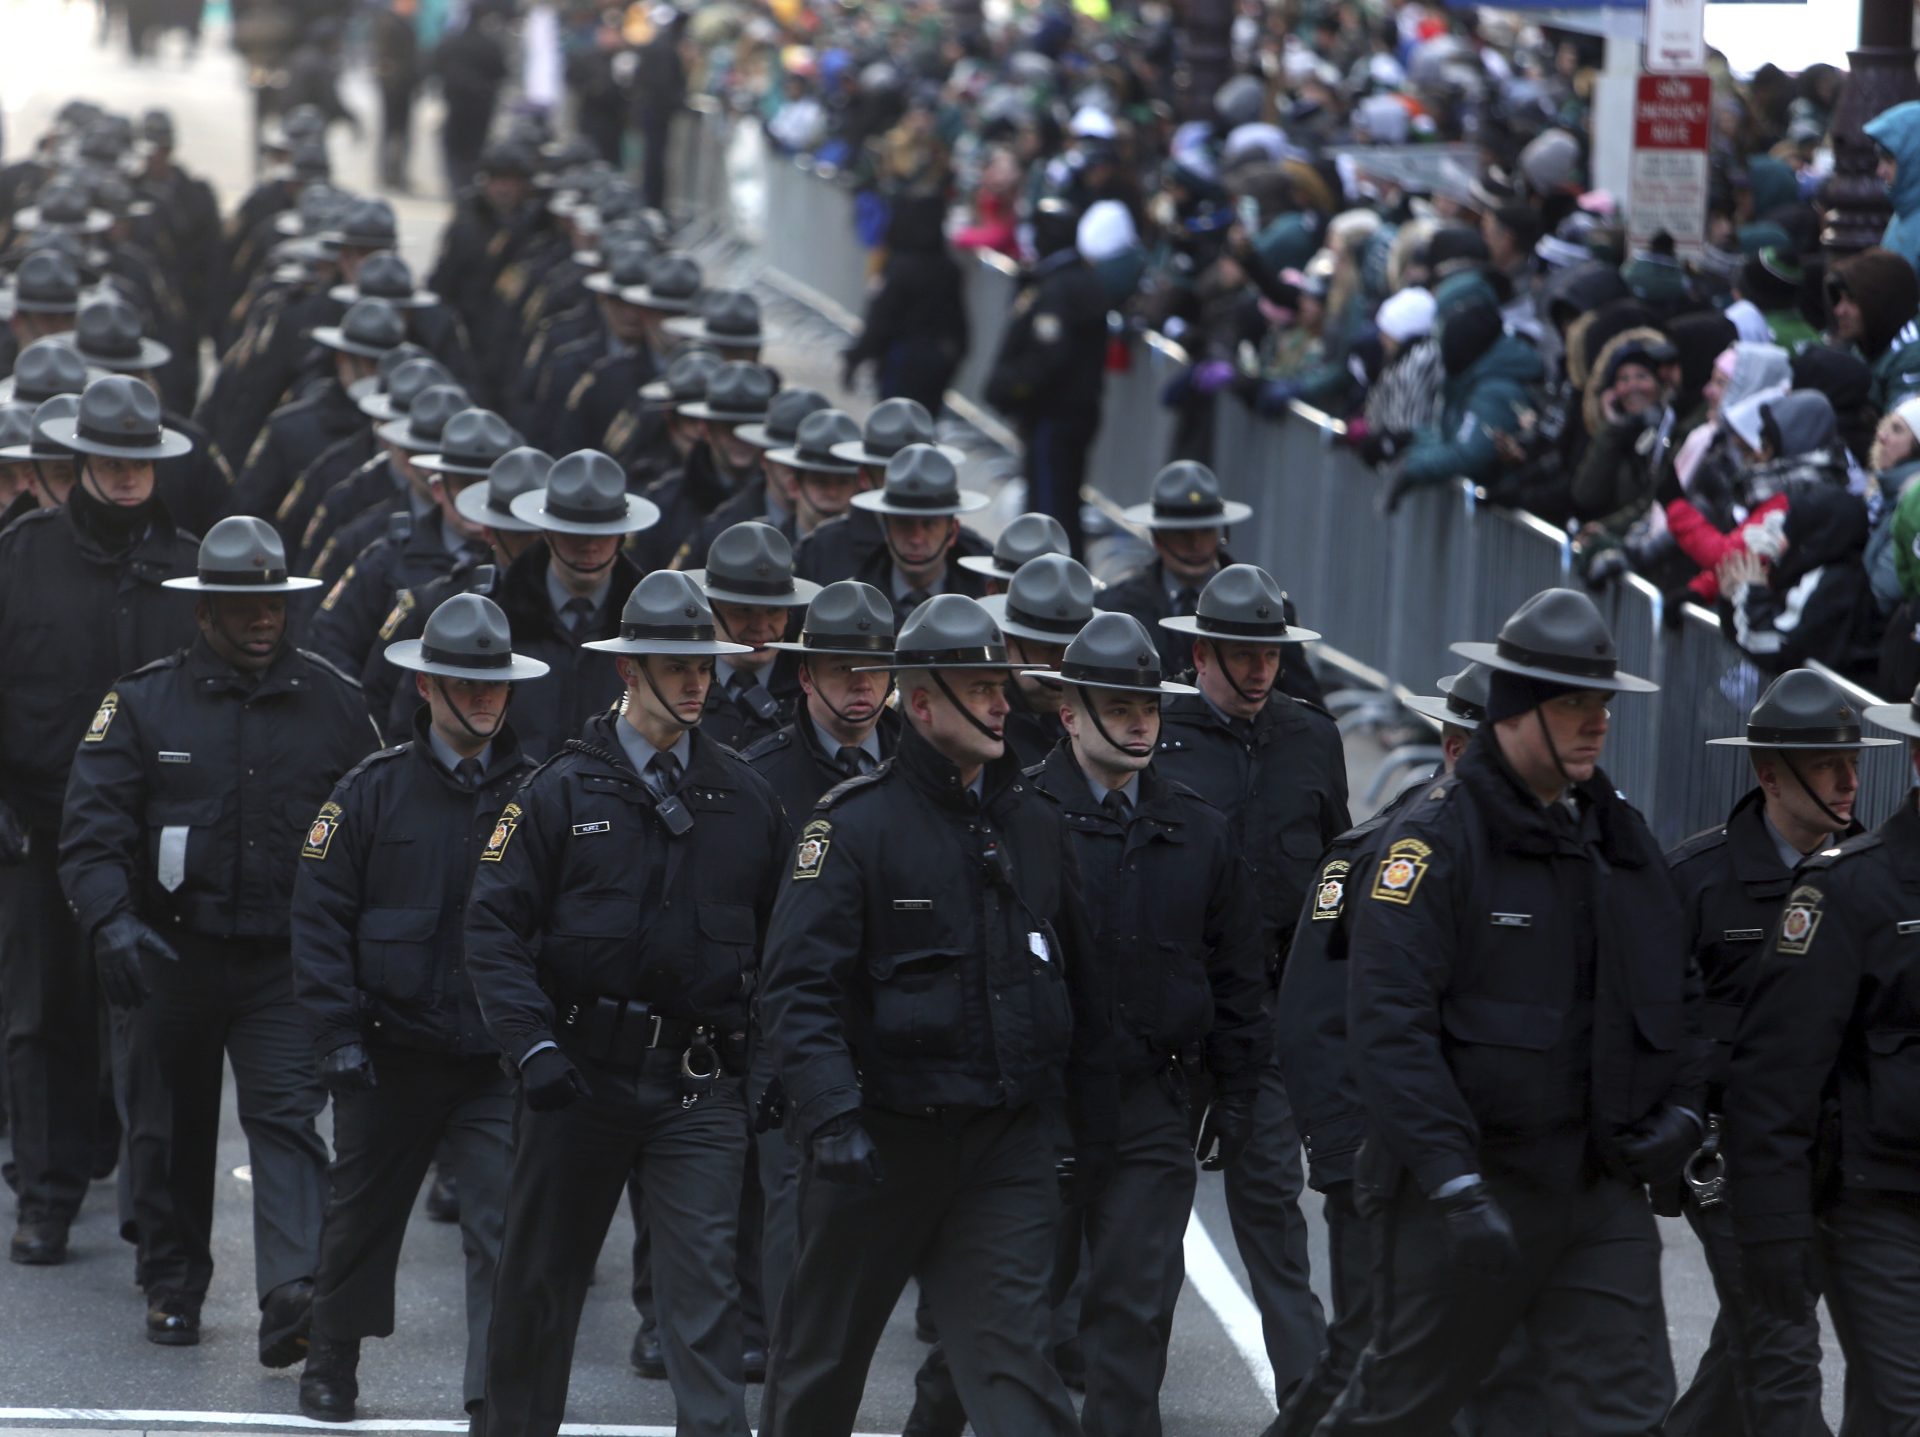 State police deploy before the Eagles team parade and celebration in 2018 in center city Philadelphia.